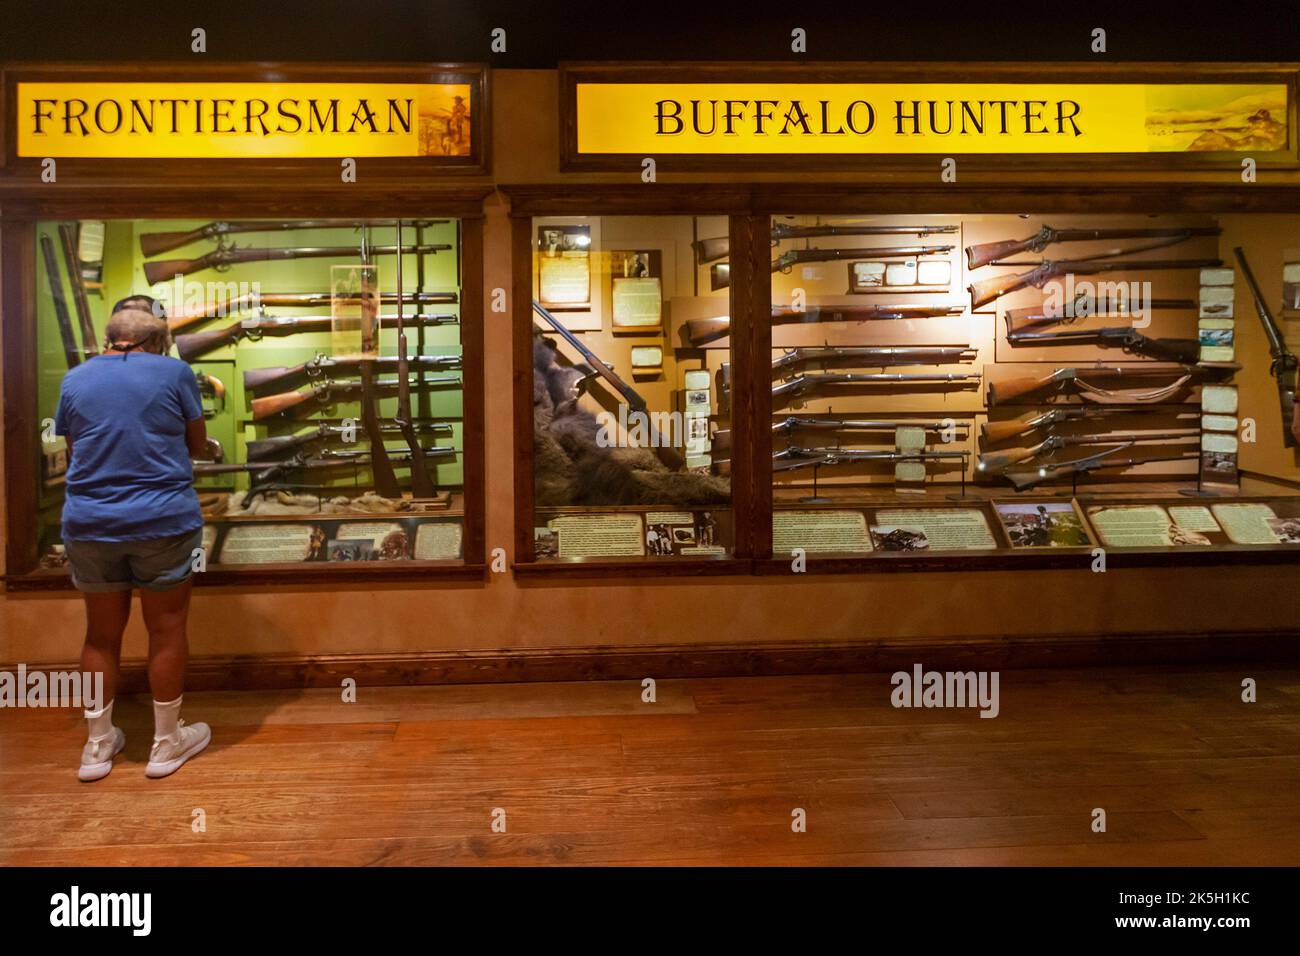 Dodge City, Kansas - A display of rifles at the Boot Hill Museum. The museum preserves the history and culture of the old west. Located on the site of Stock Photo